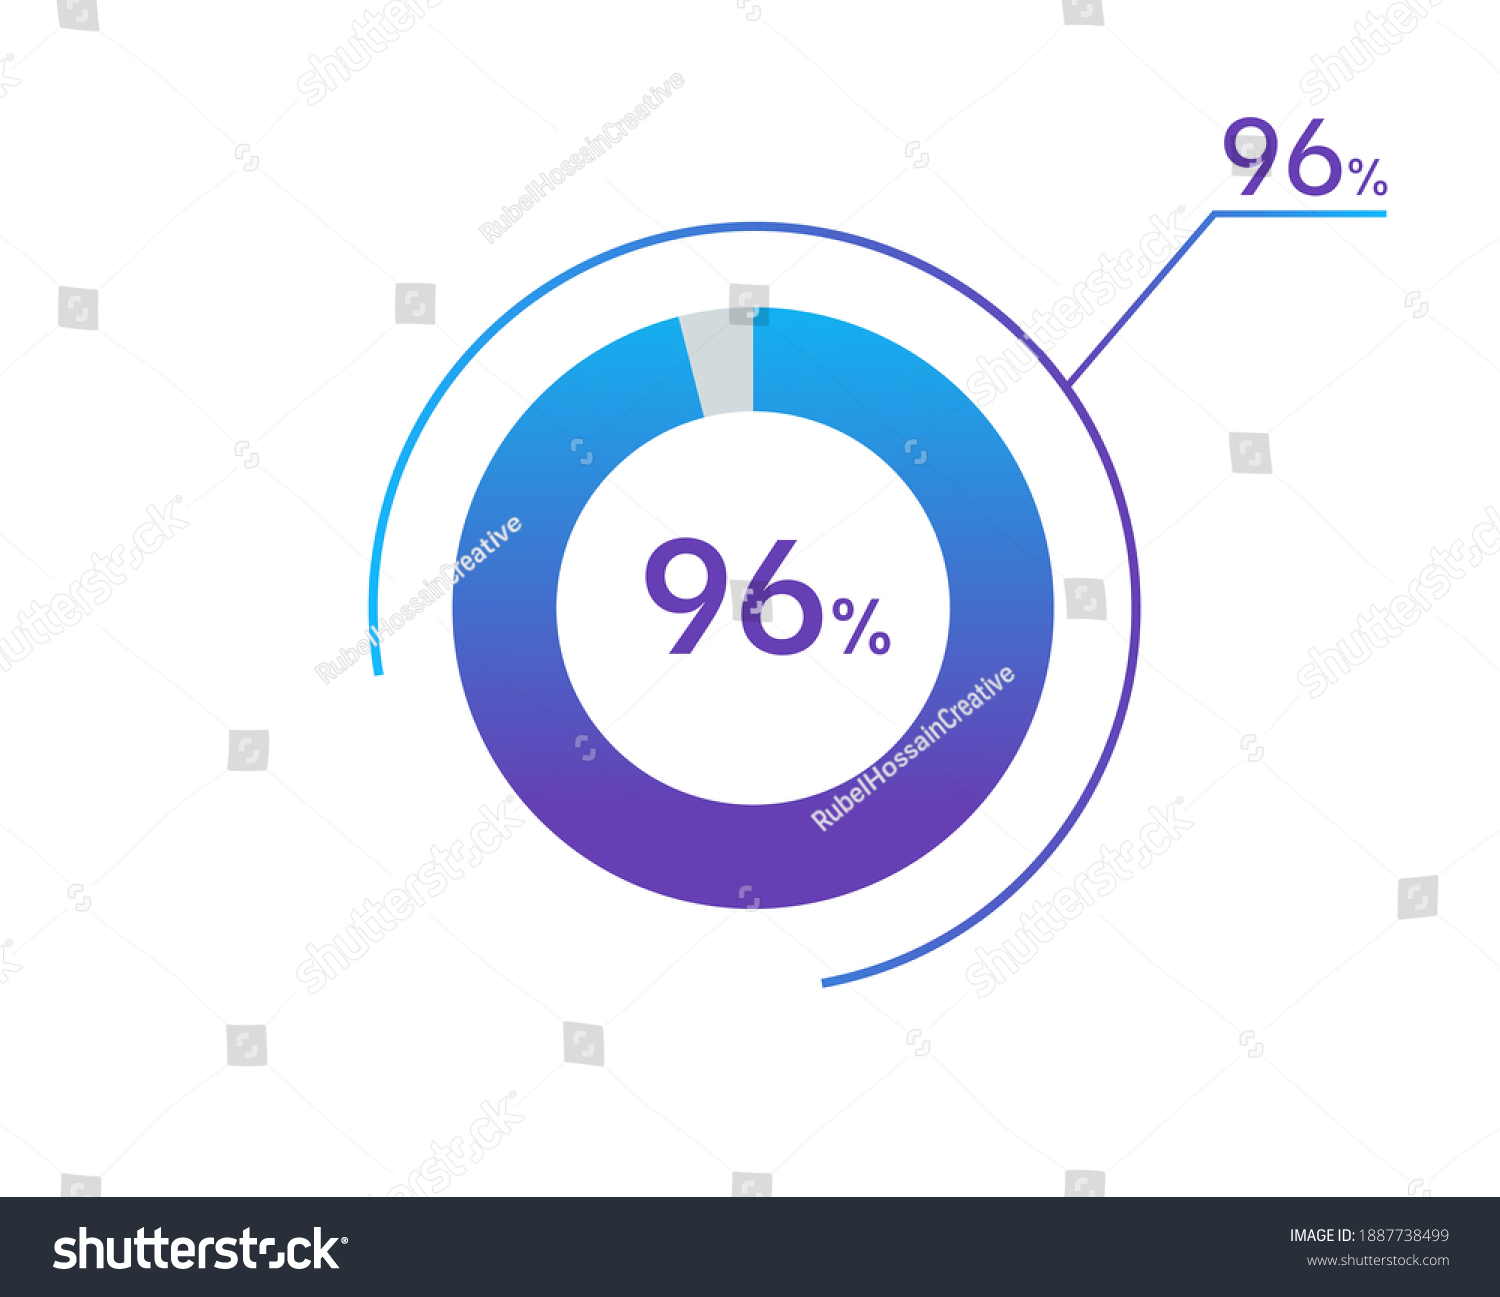 SVG of 96 percents pie chart infographic elements. 96% percentage infographic circle icons for download, illustration, business, web design svg